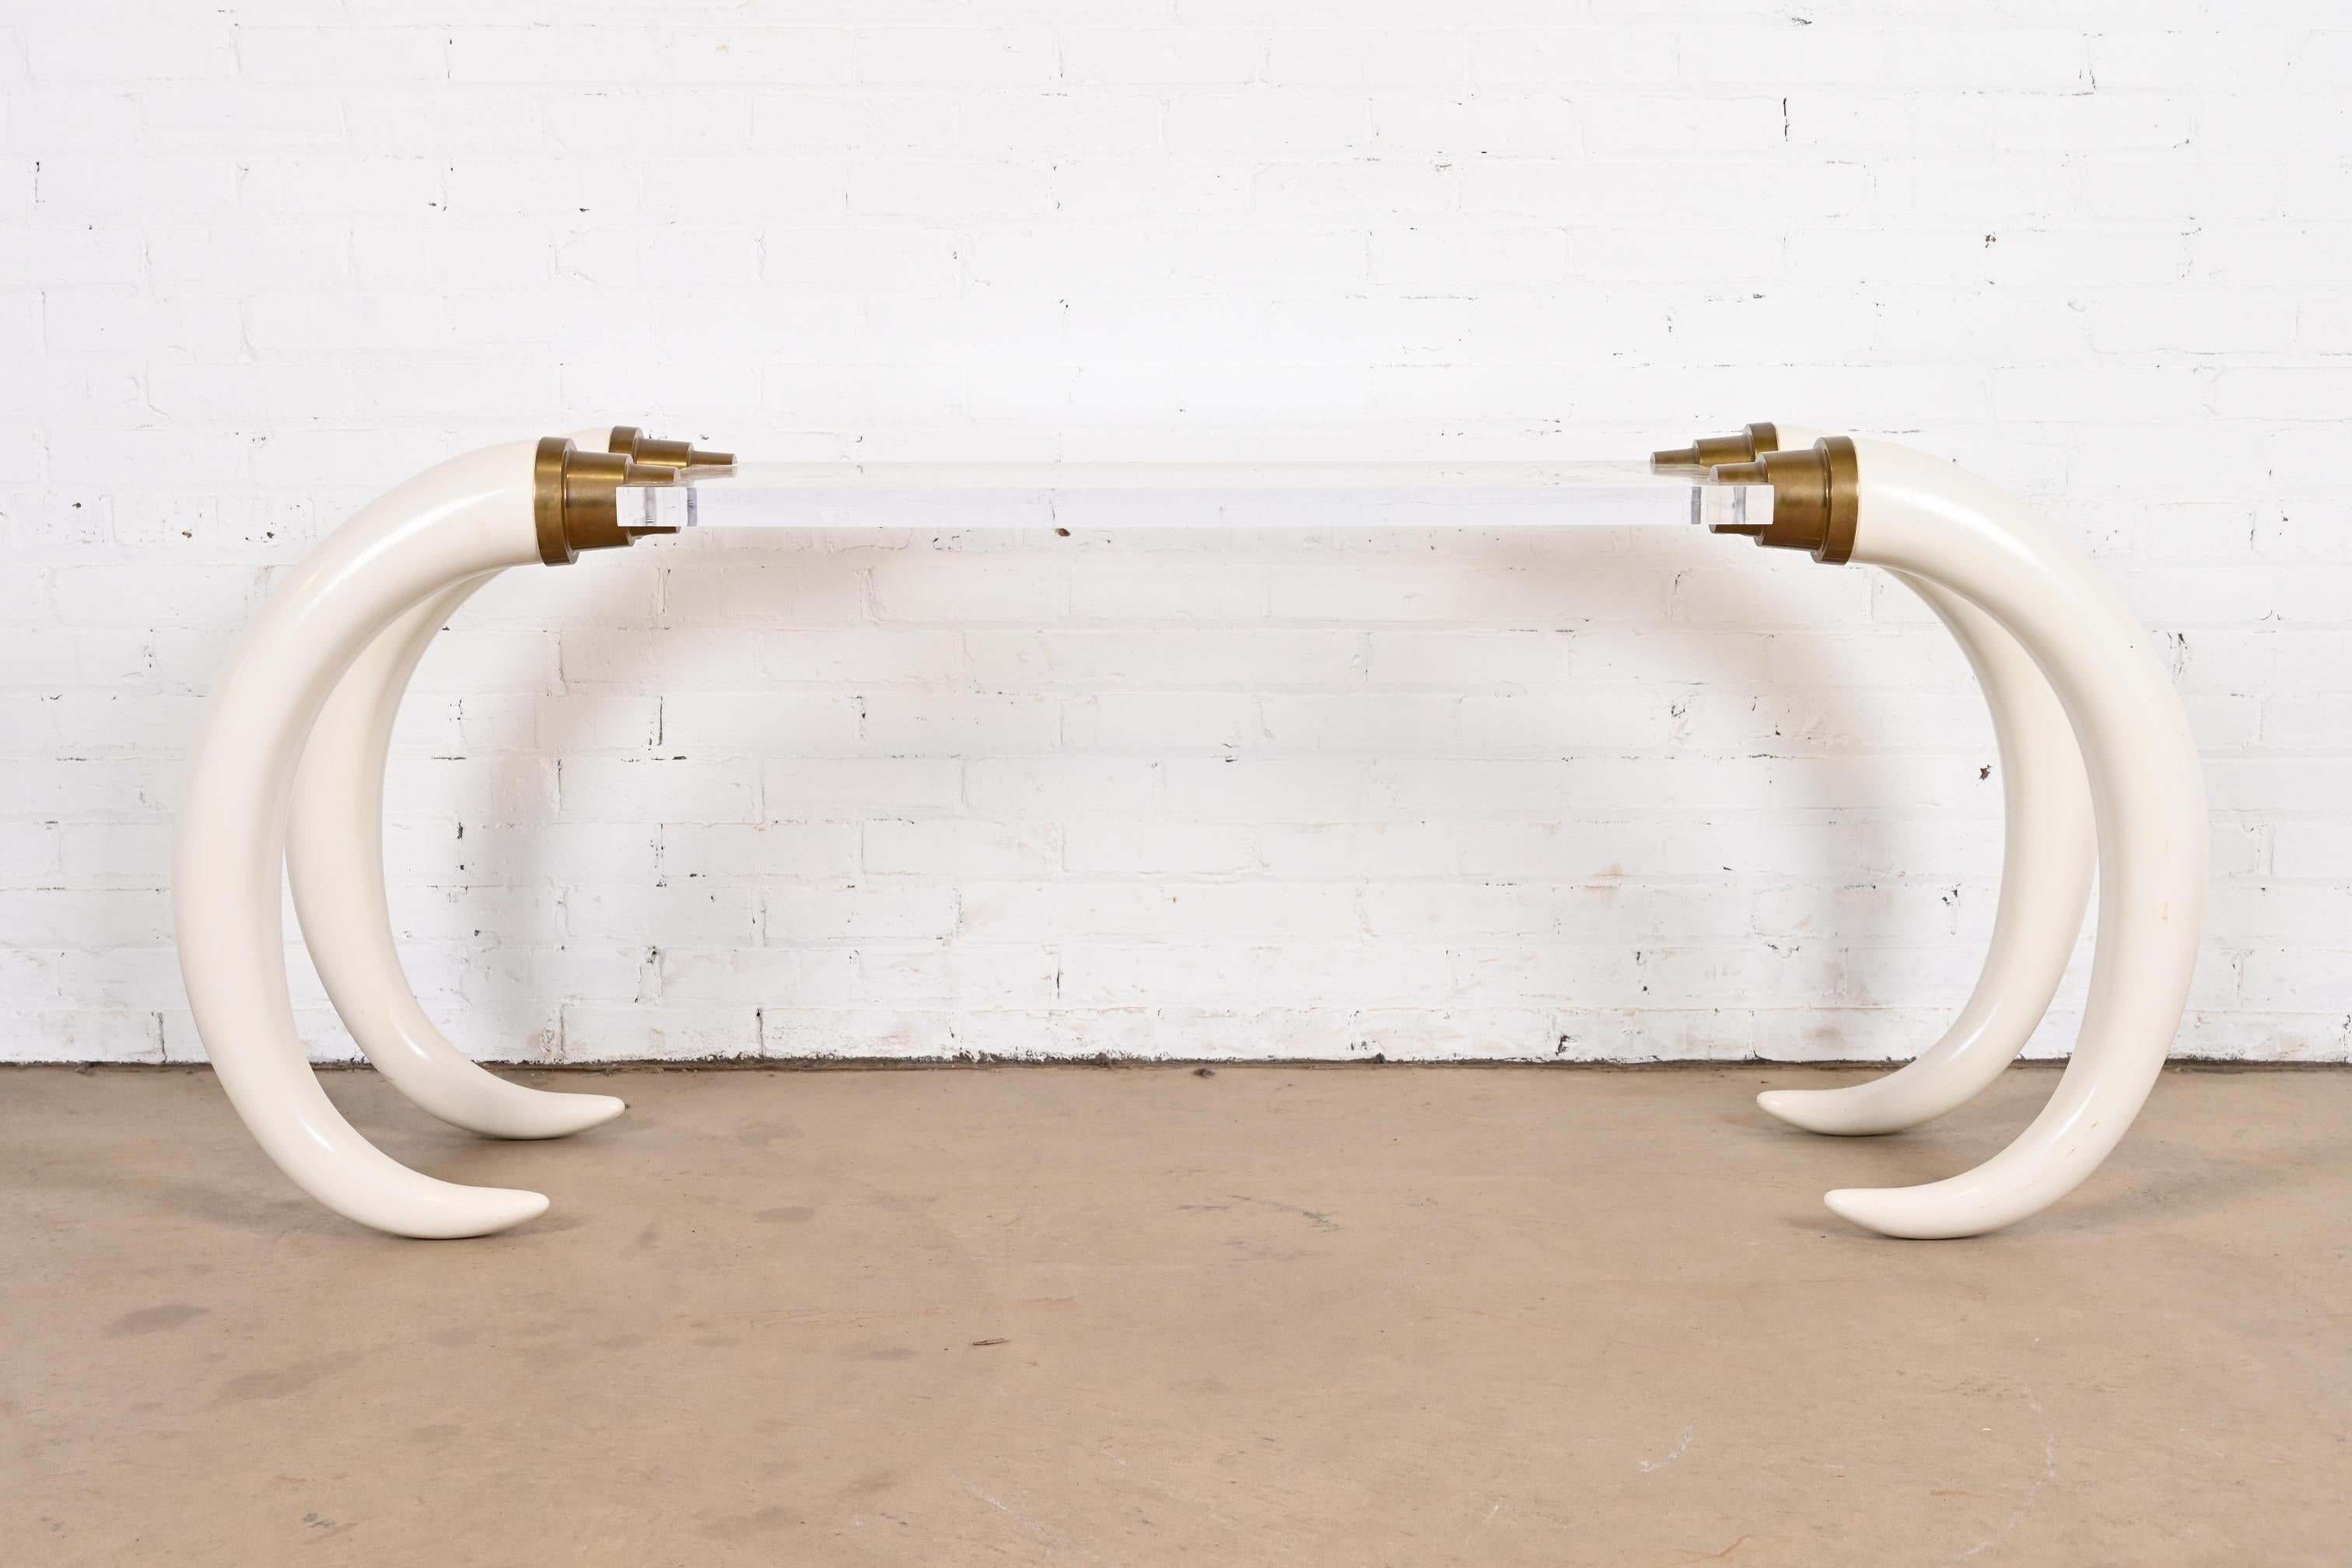 American Modern Elephant Tusk Console Table by Suzzane Dahl & Jerry Barich, 1970s